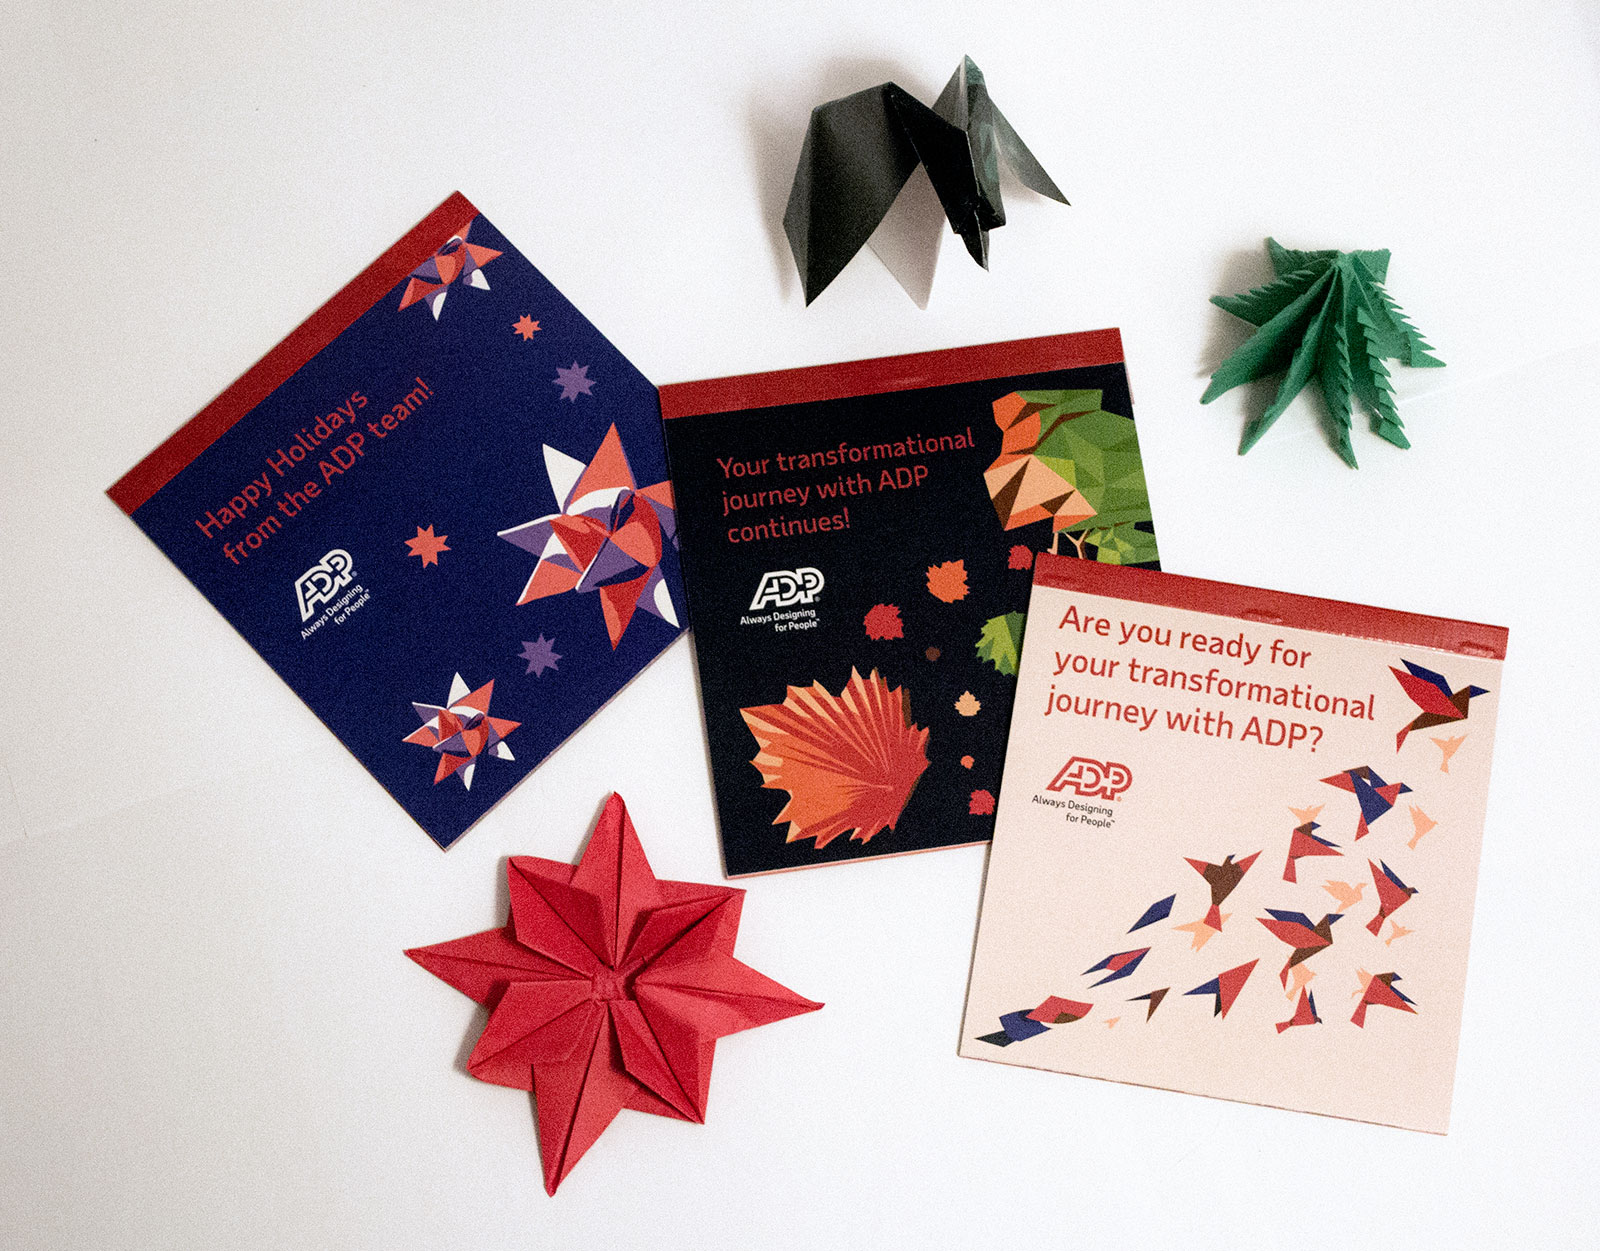 3 Origami booklets arranged with origami folded pieces together. The first book title reads Happy Holidays from the ADP team! the second reads Your transformational journey with ADP continues! and the 3rd reads Are you ready for your transformational journey with ADP?